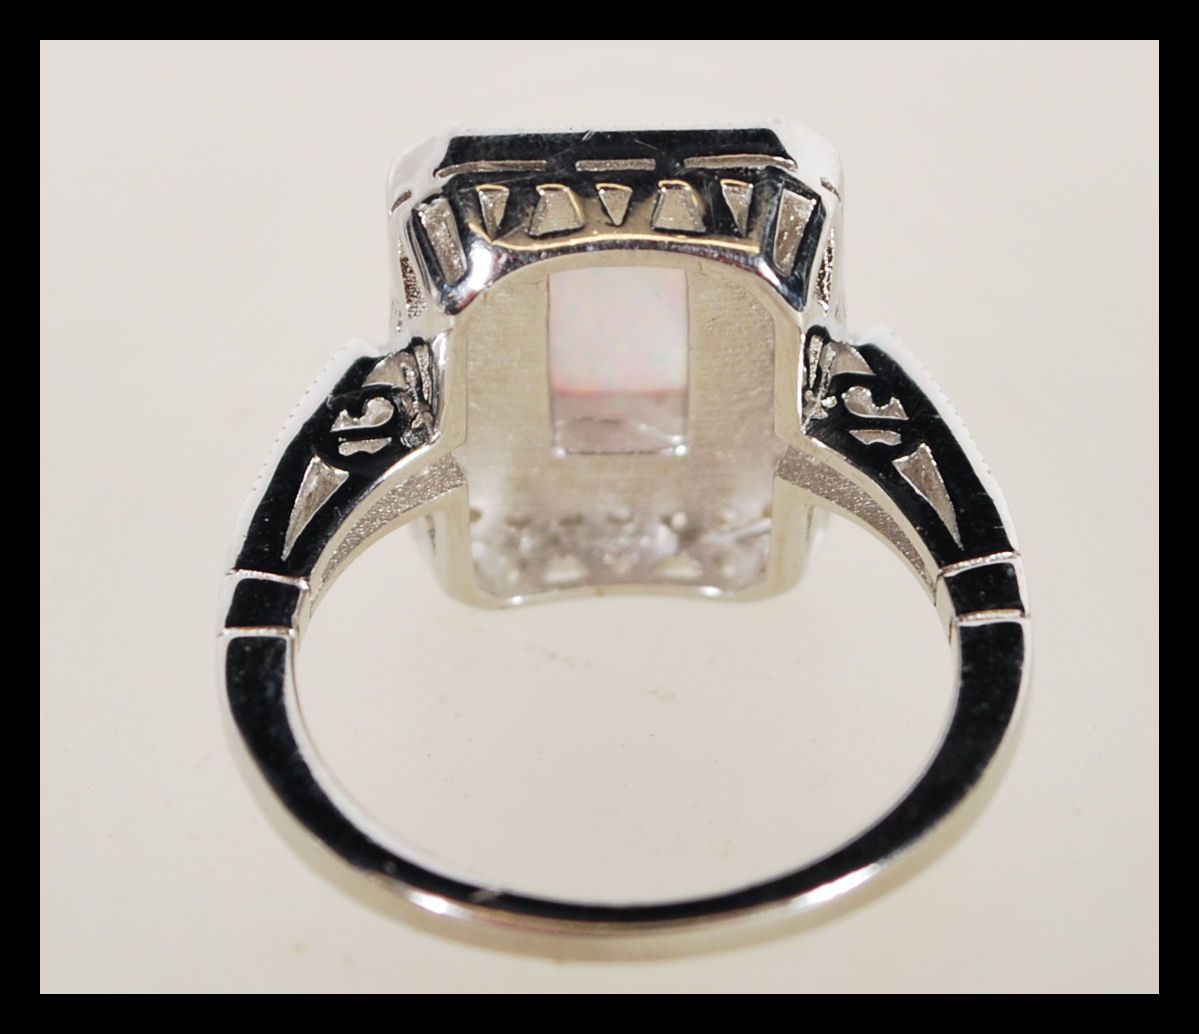 A sterling silver Art Deco style ring having a central opal panel and decorated with CZ stones. - Image 3 of 4